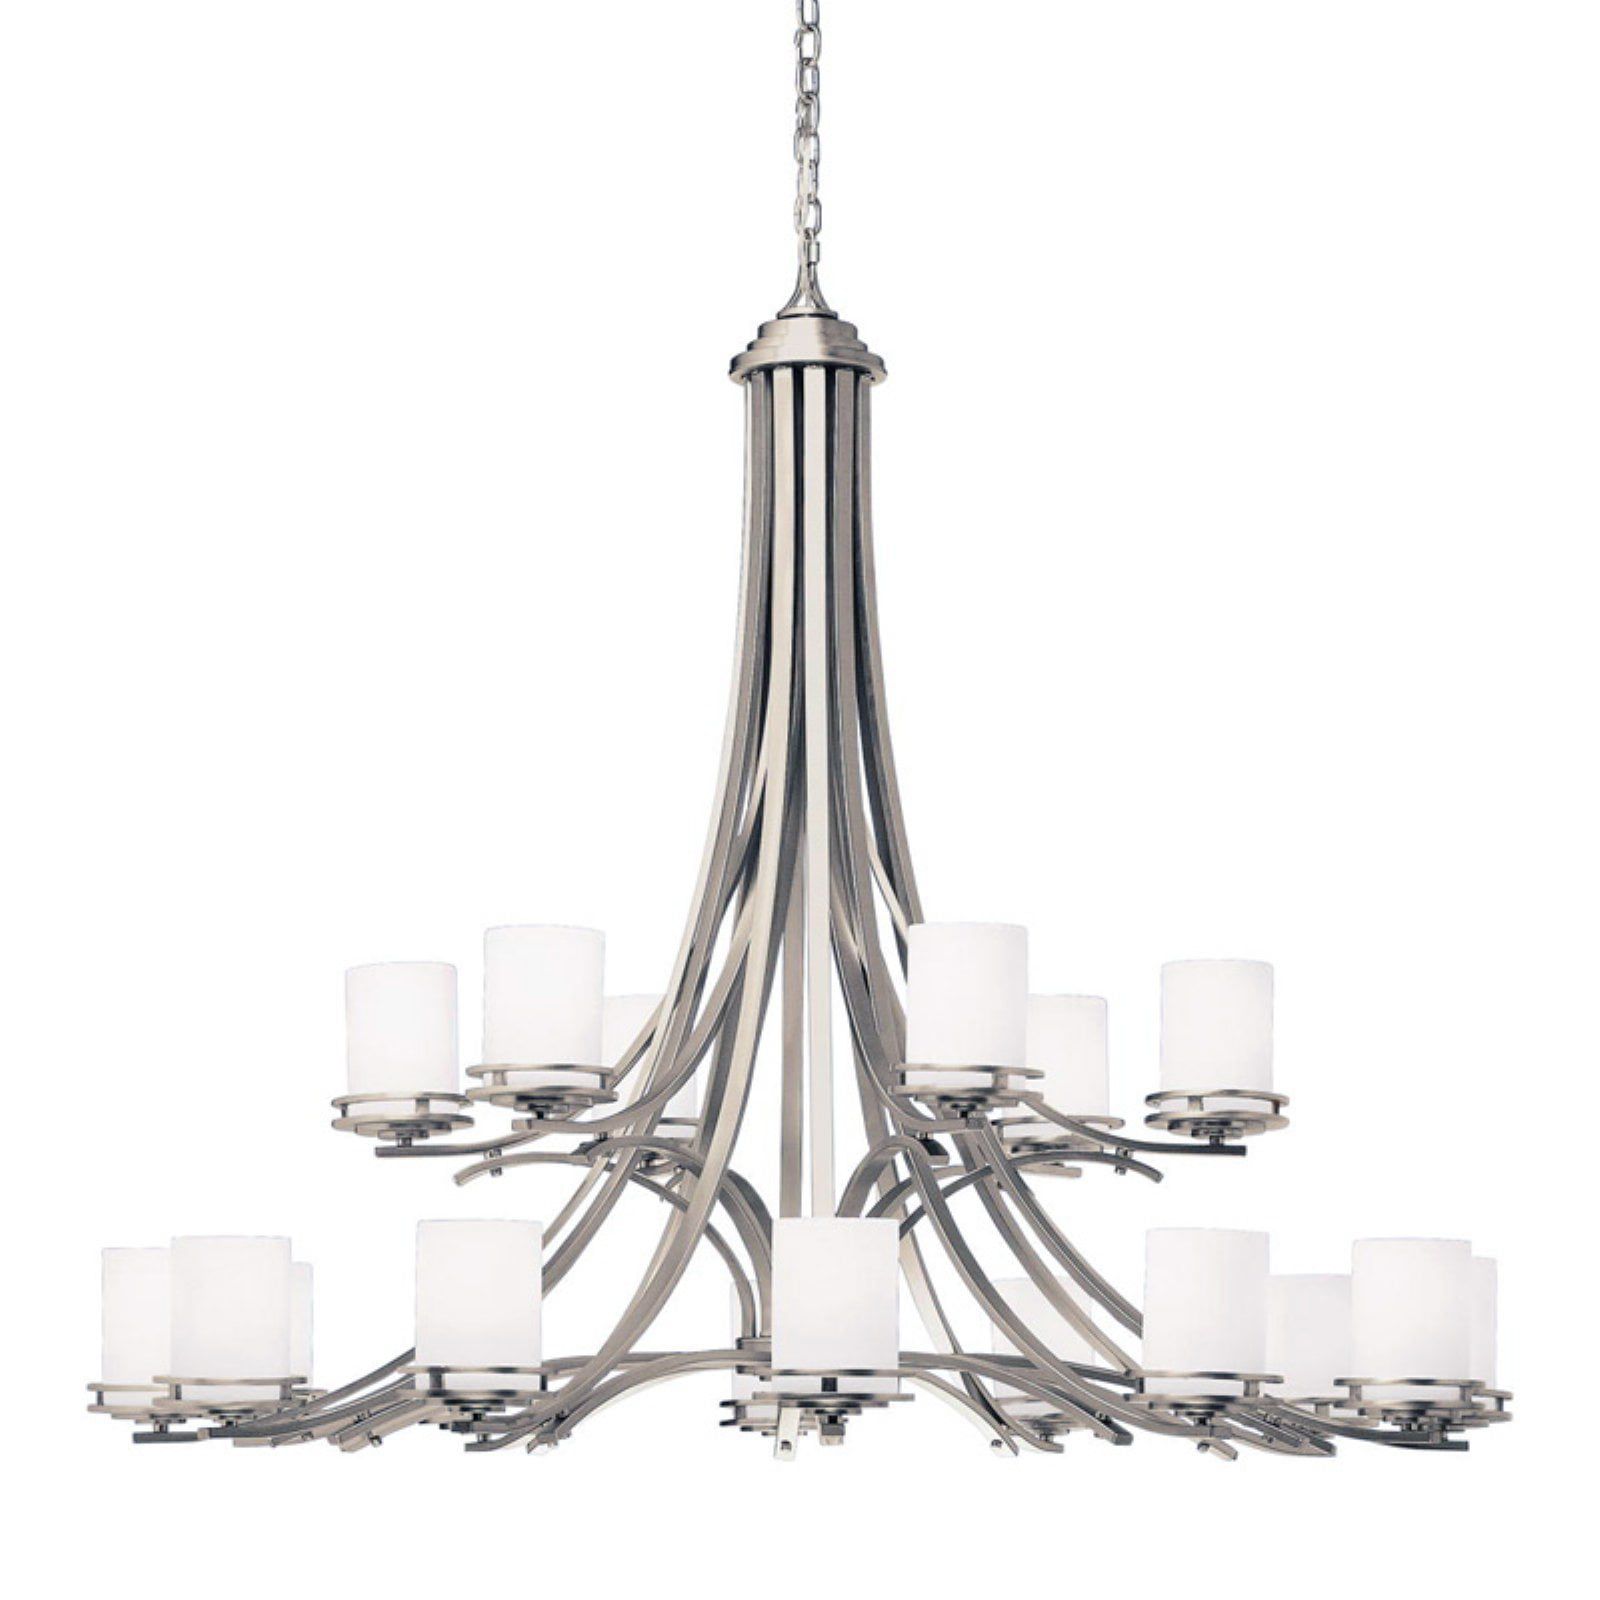 Hendrik Brushed Nickel 18-Light Tiered Chandelier with Satin Etched Opal Glass